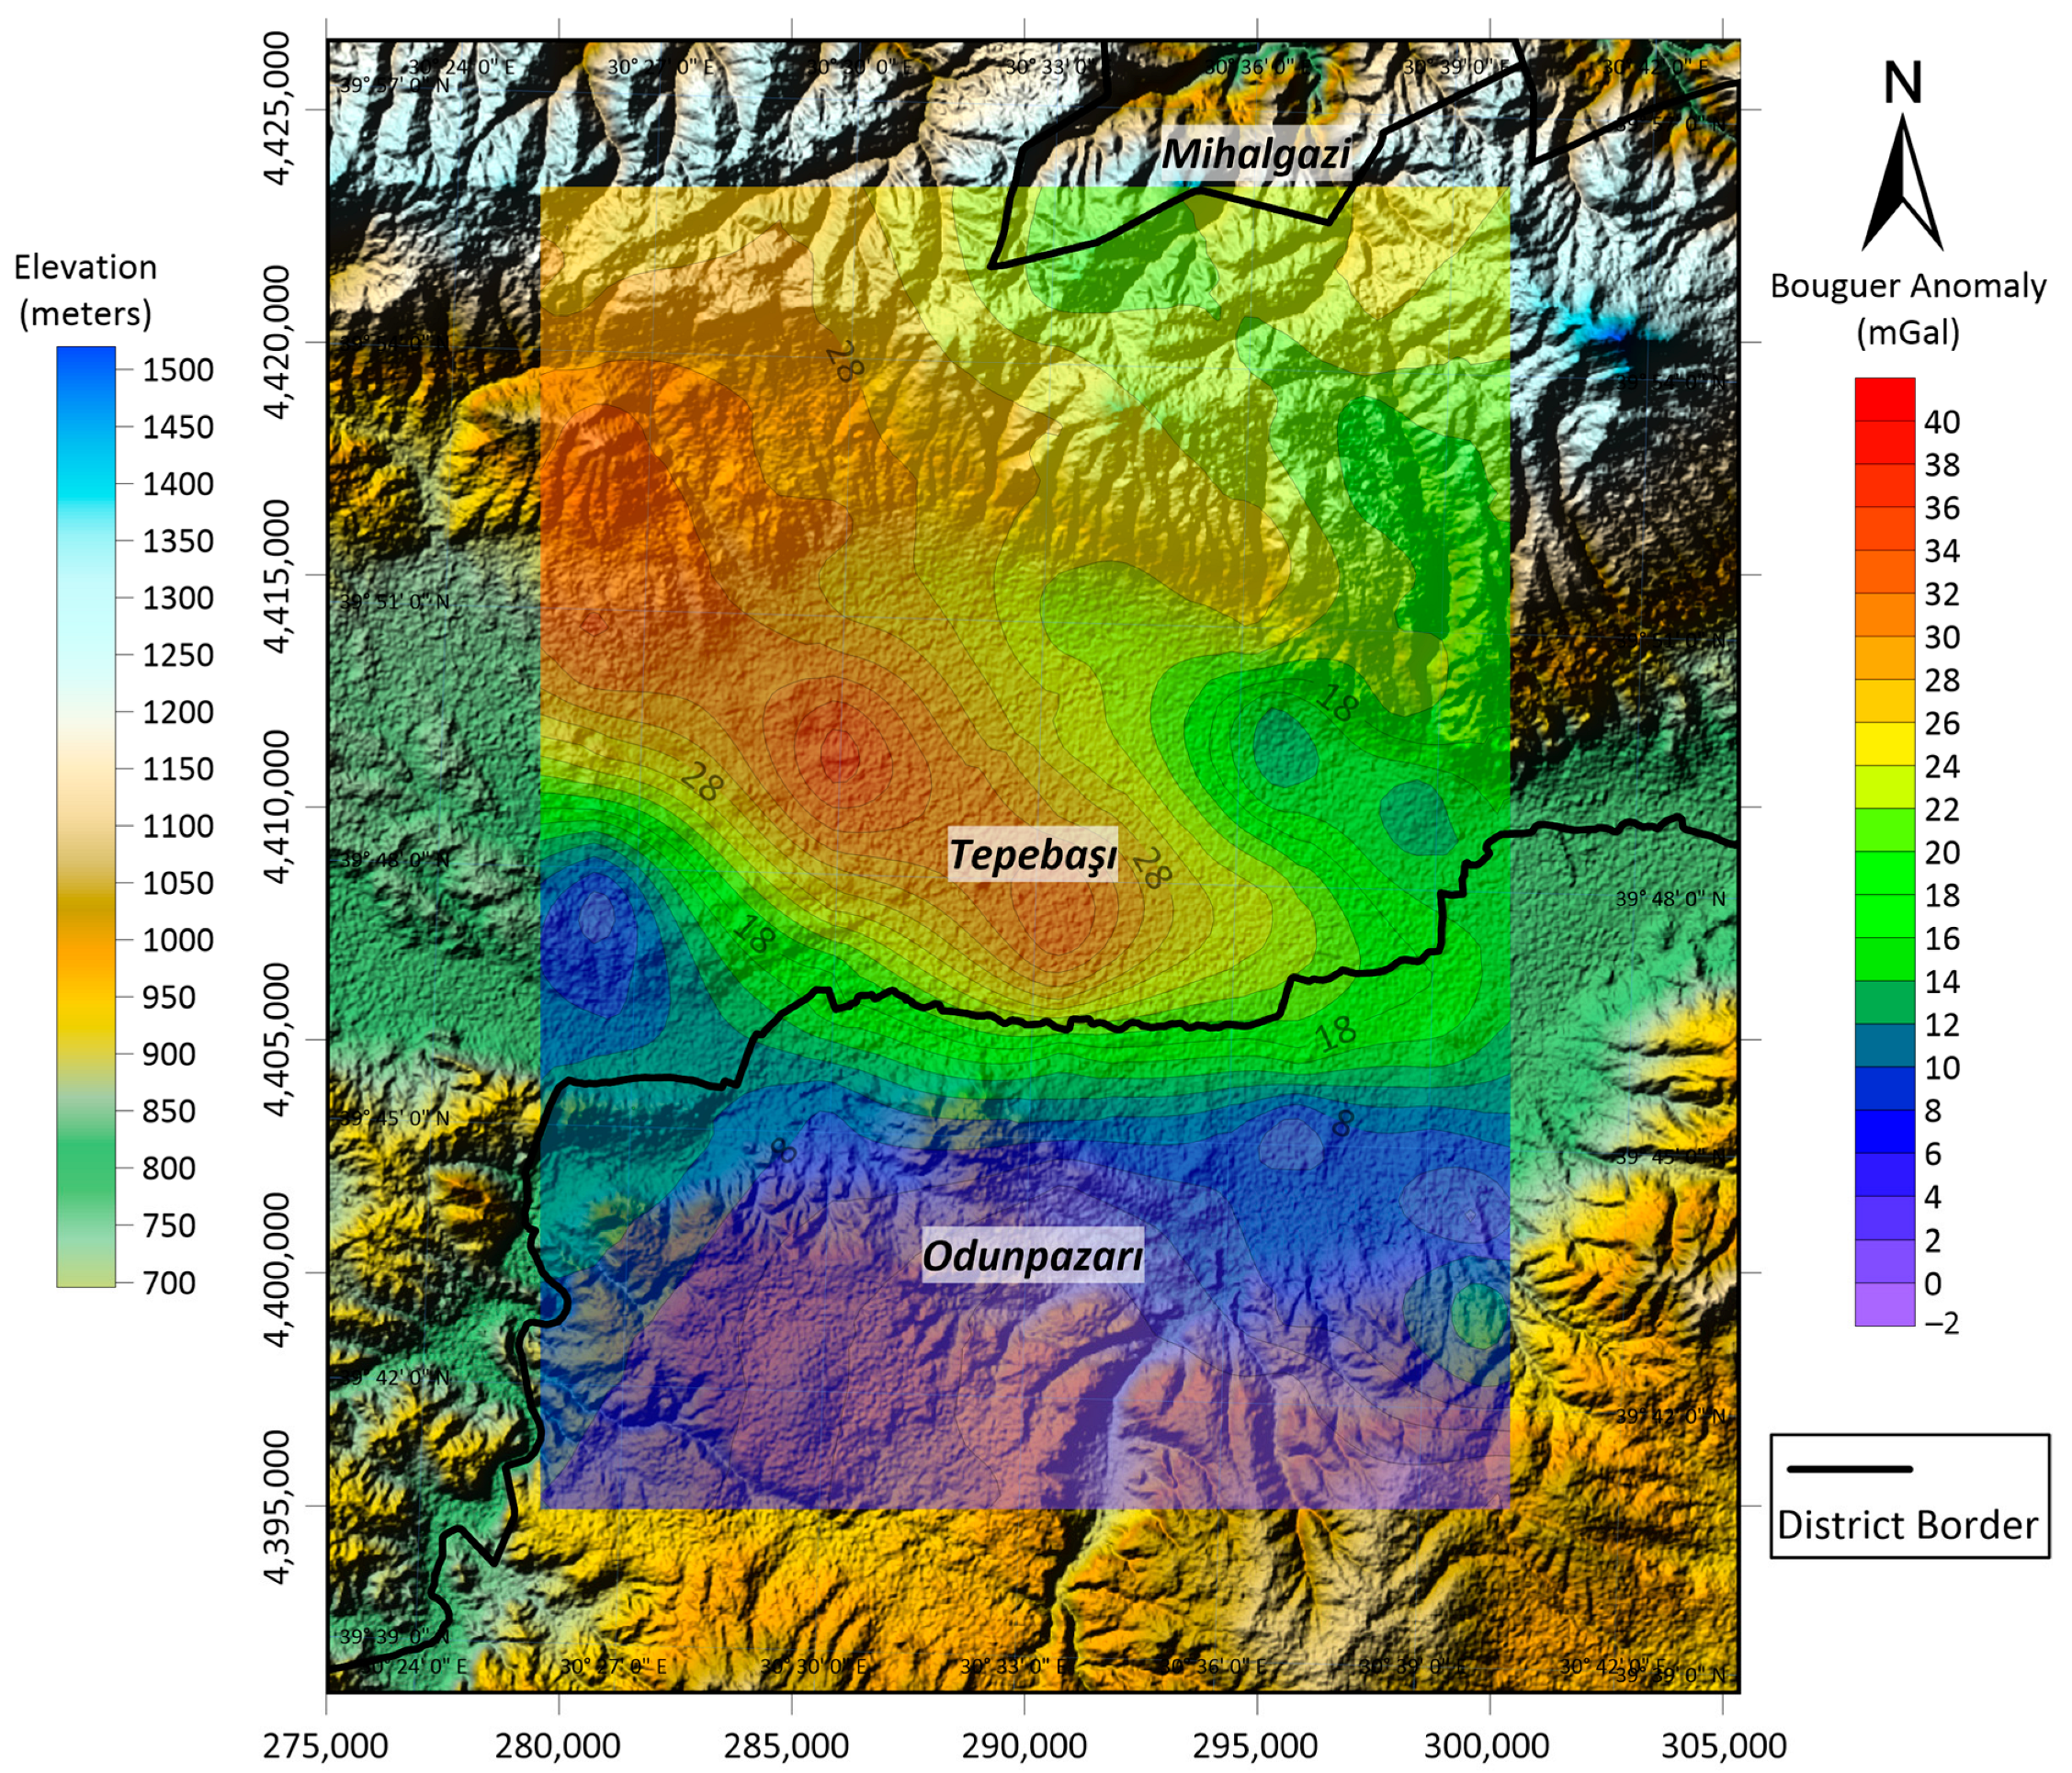 A) shows an elevation contour map created using gravity data. The